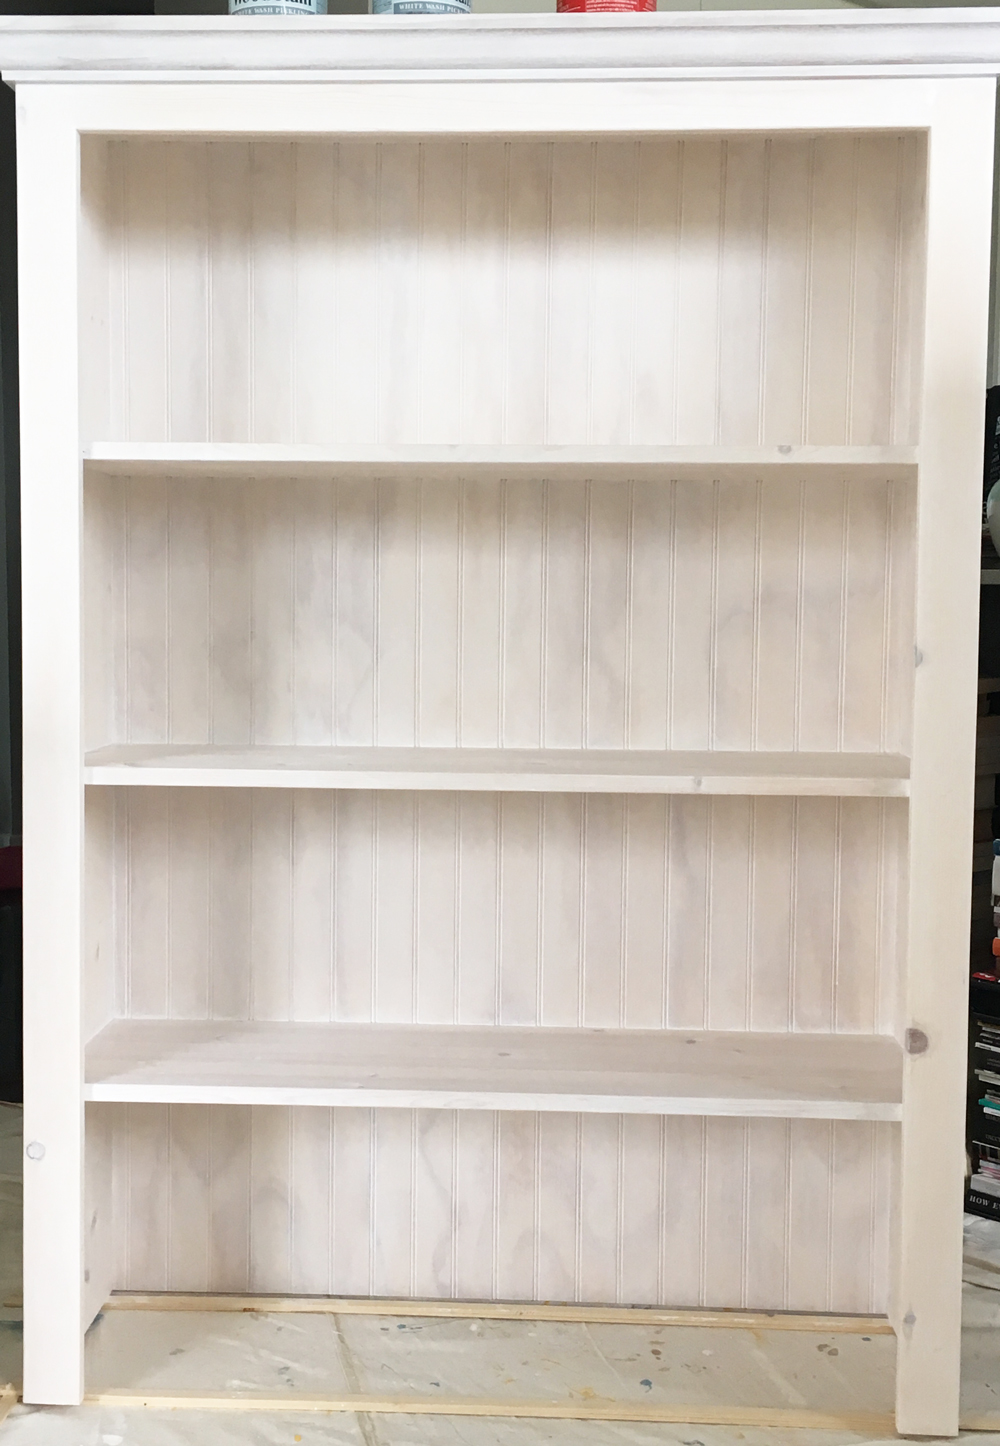 Lessons Learned Building Bookcases and a Fireplace Surround